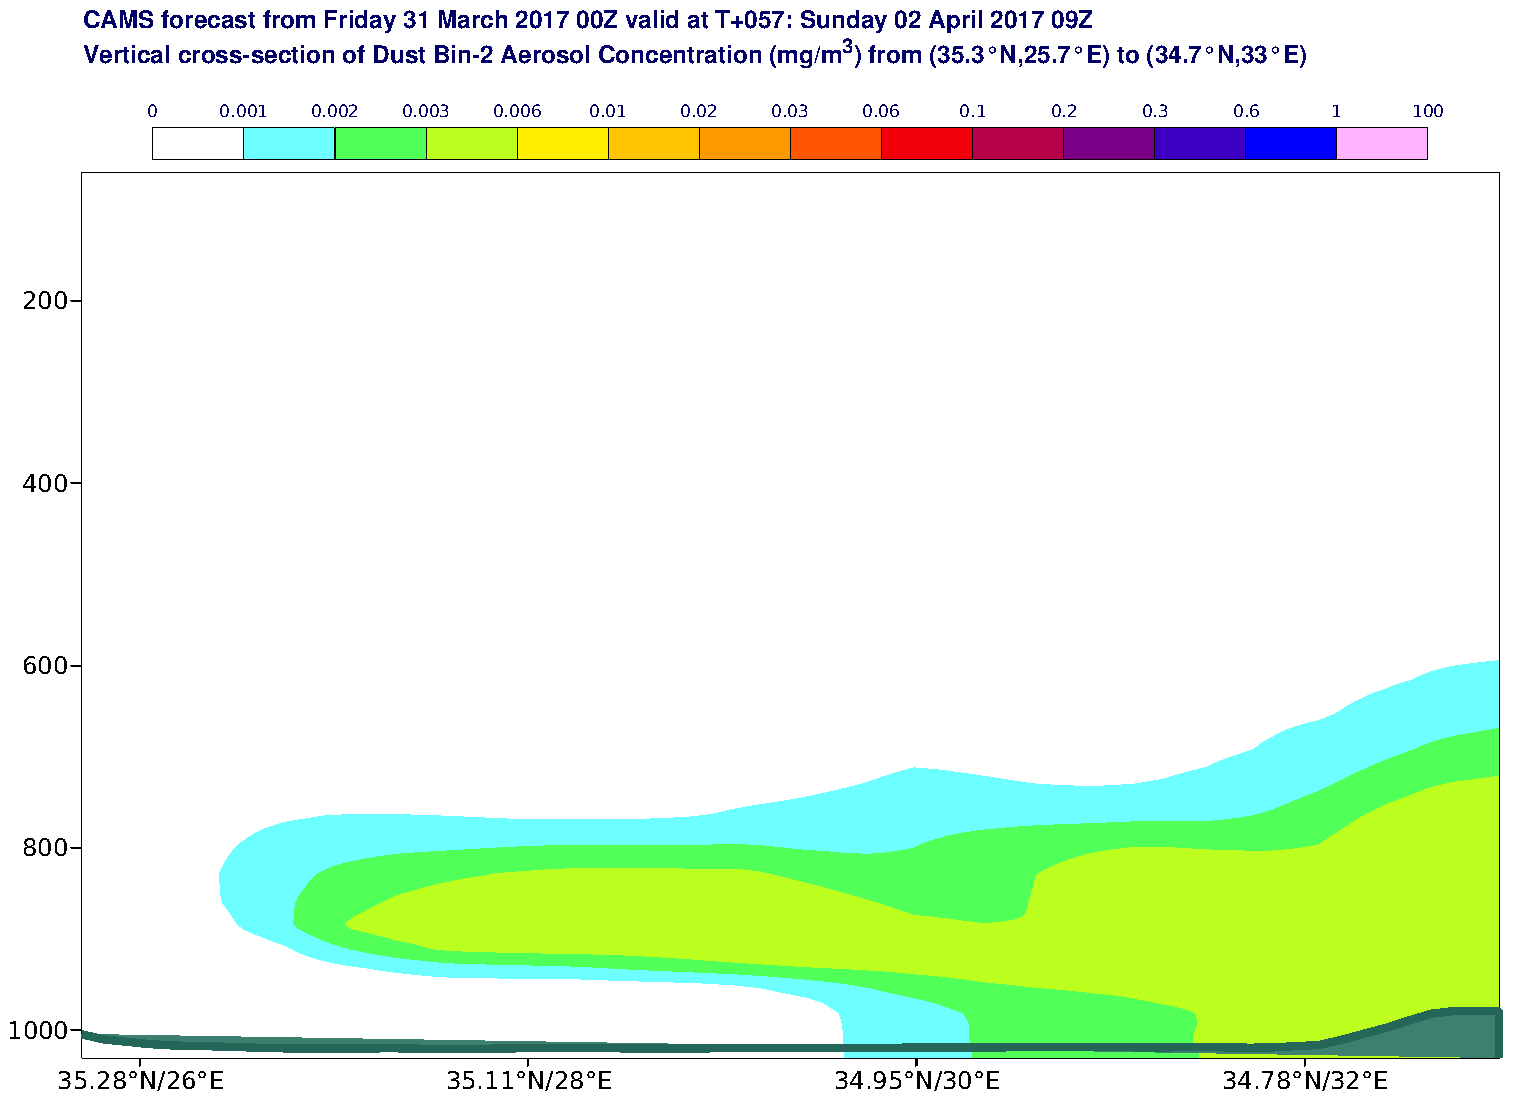 Vertical cross-section of Dust Bin-2 Aerosol Concentration (mg/m3) valid at T57 - 2017-04-02 09:00